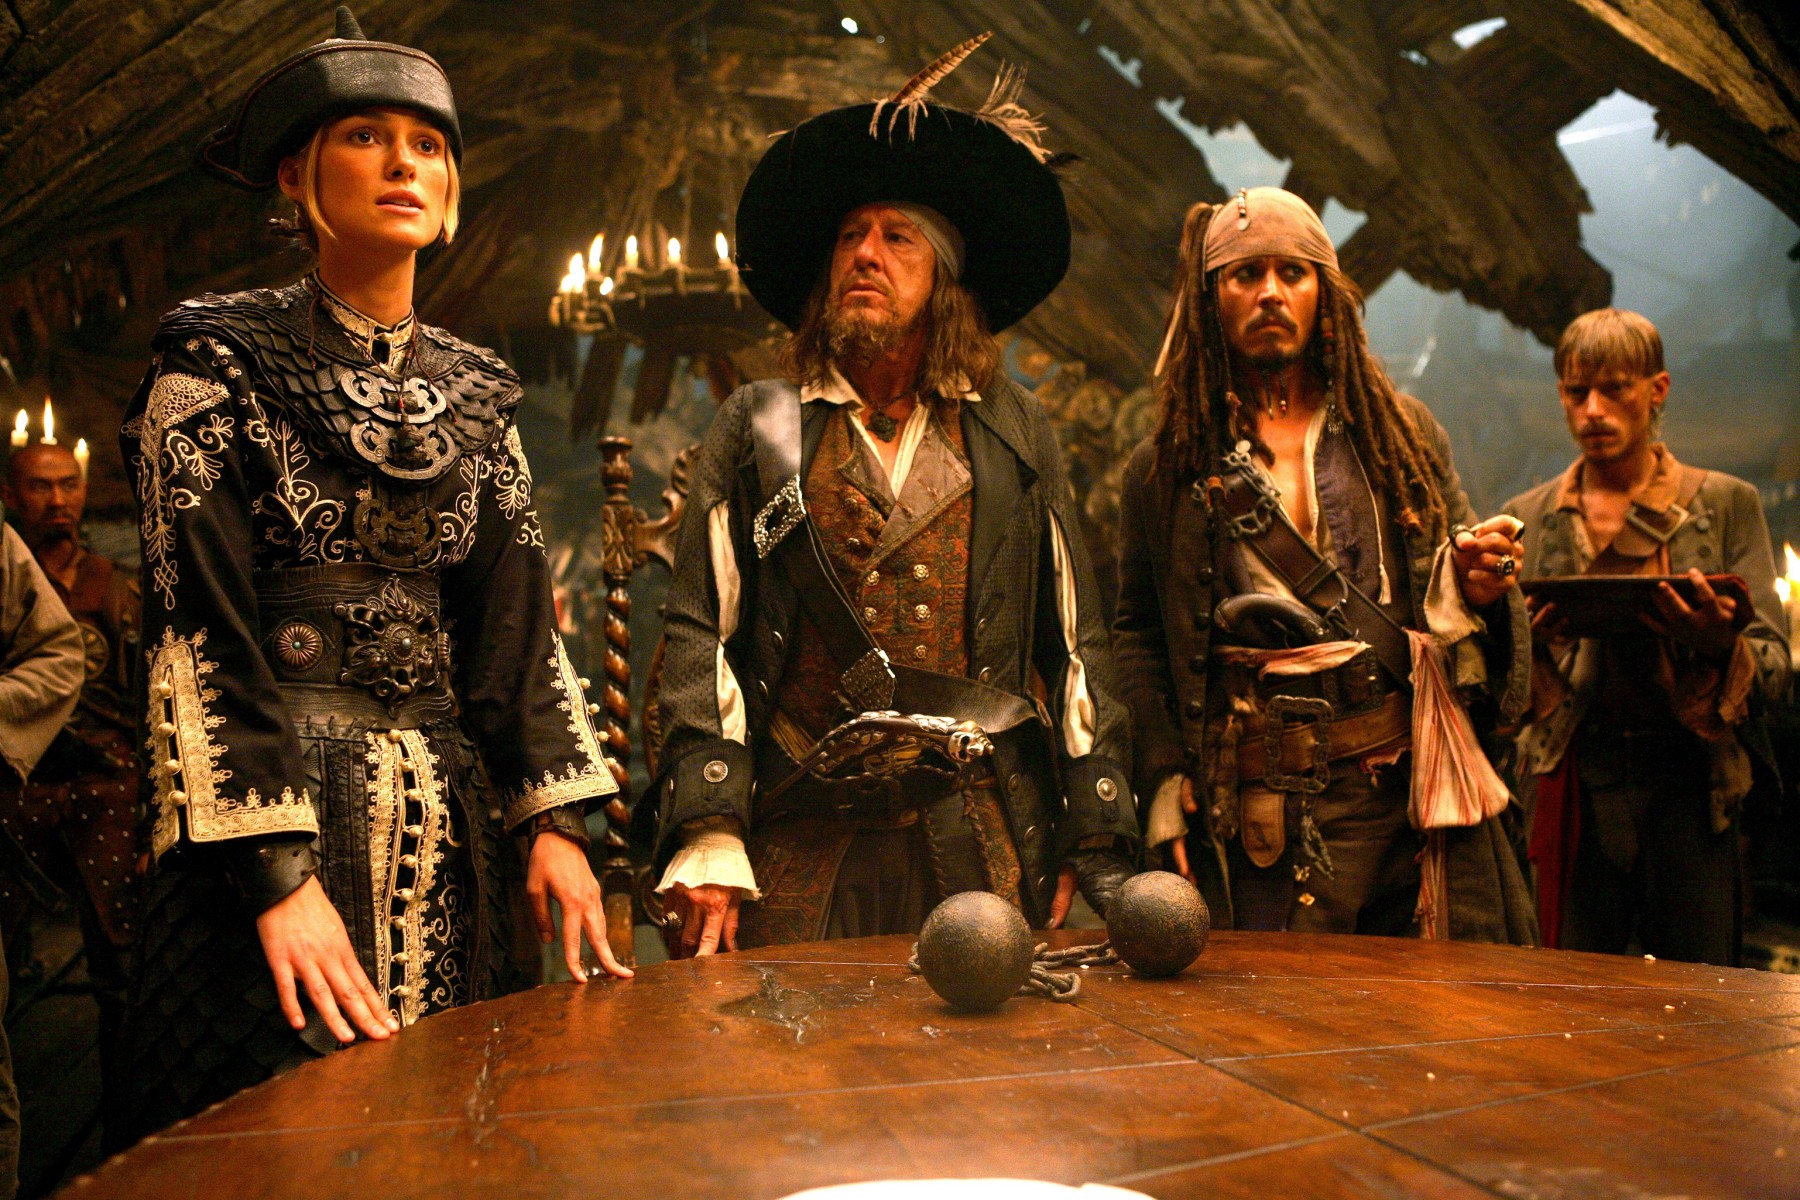 Pirates of the Caribbean: At World's End (film) - D23